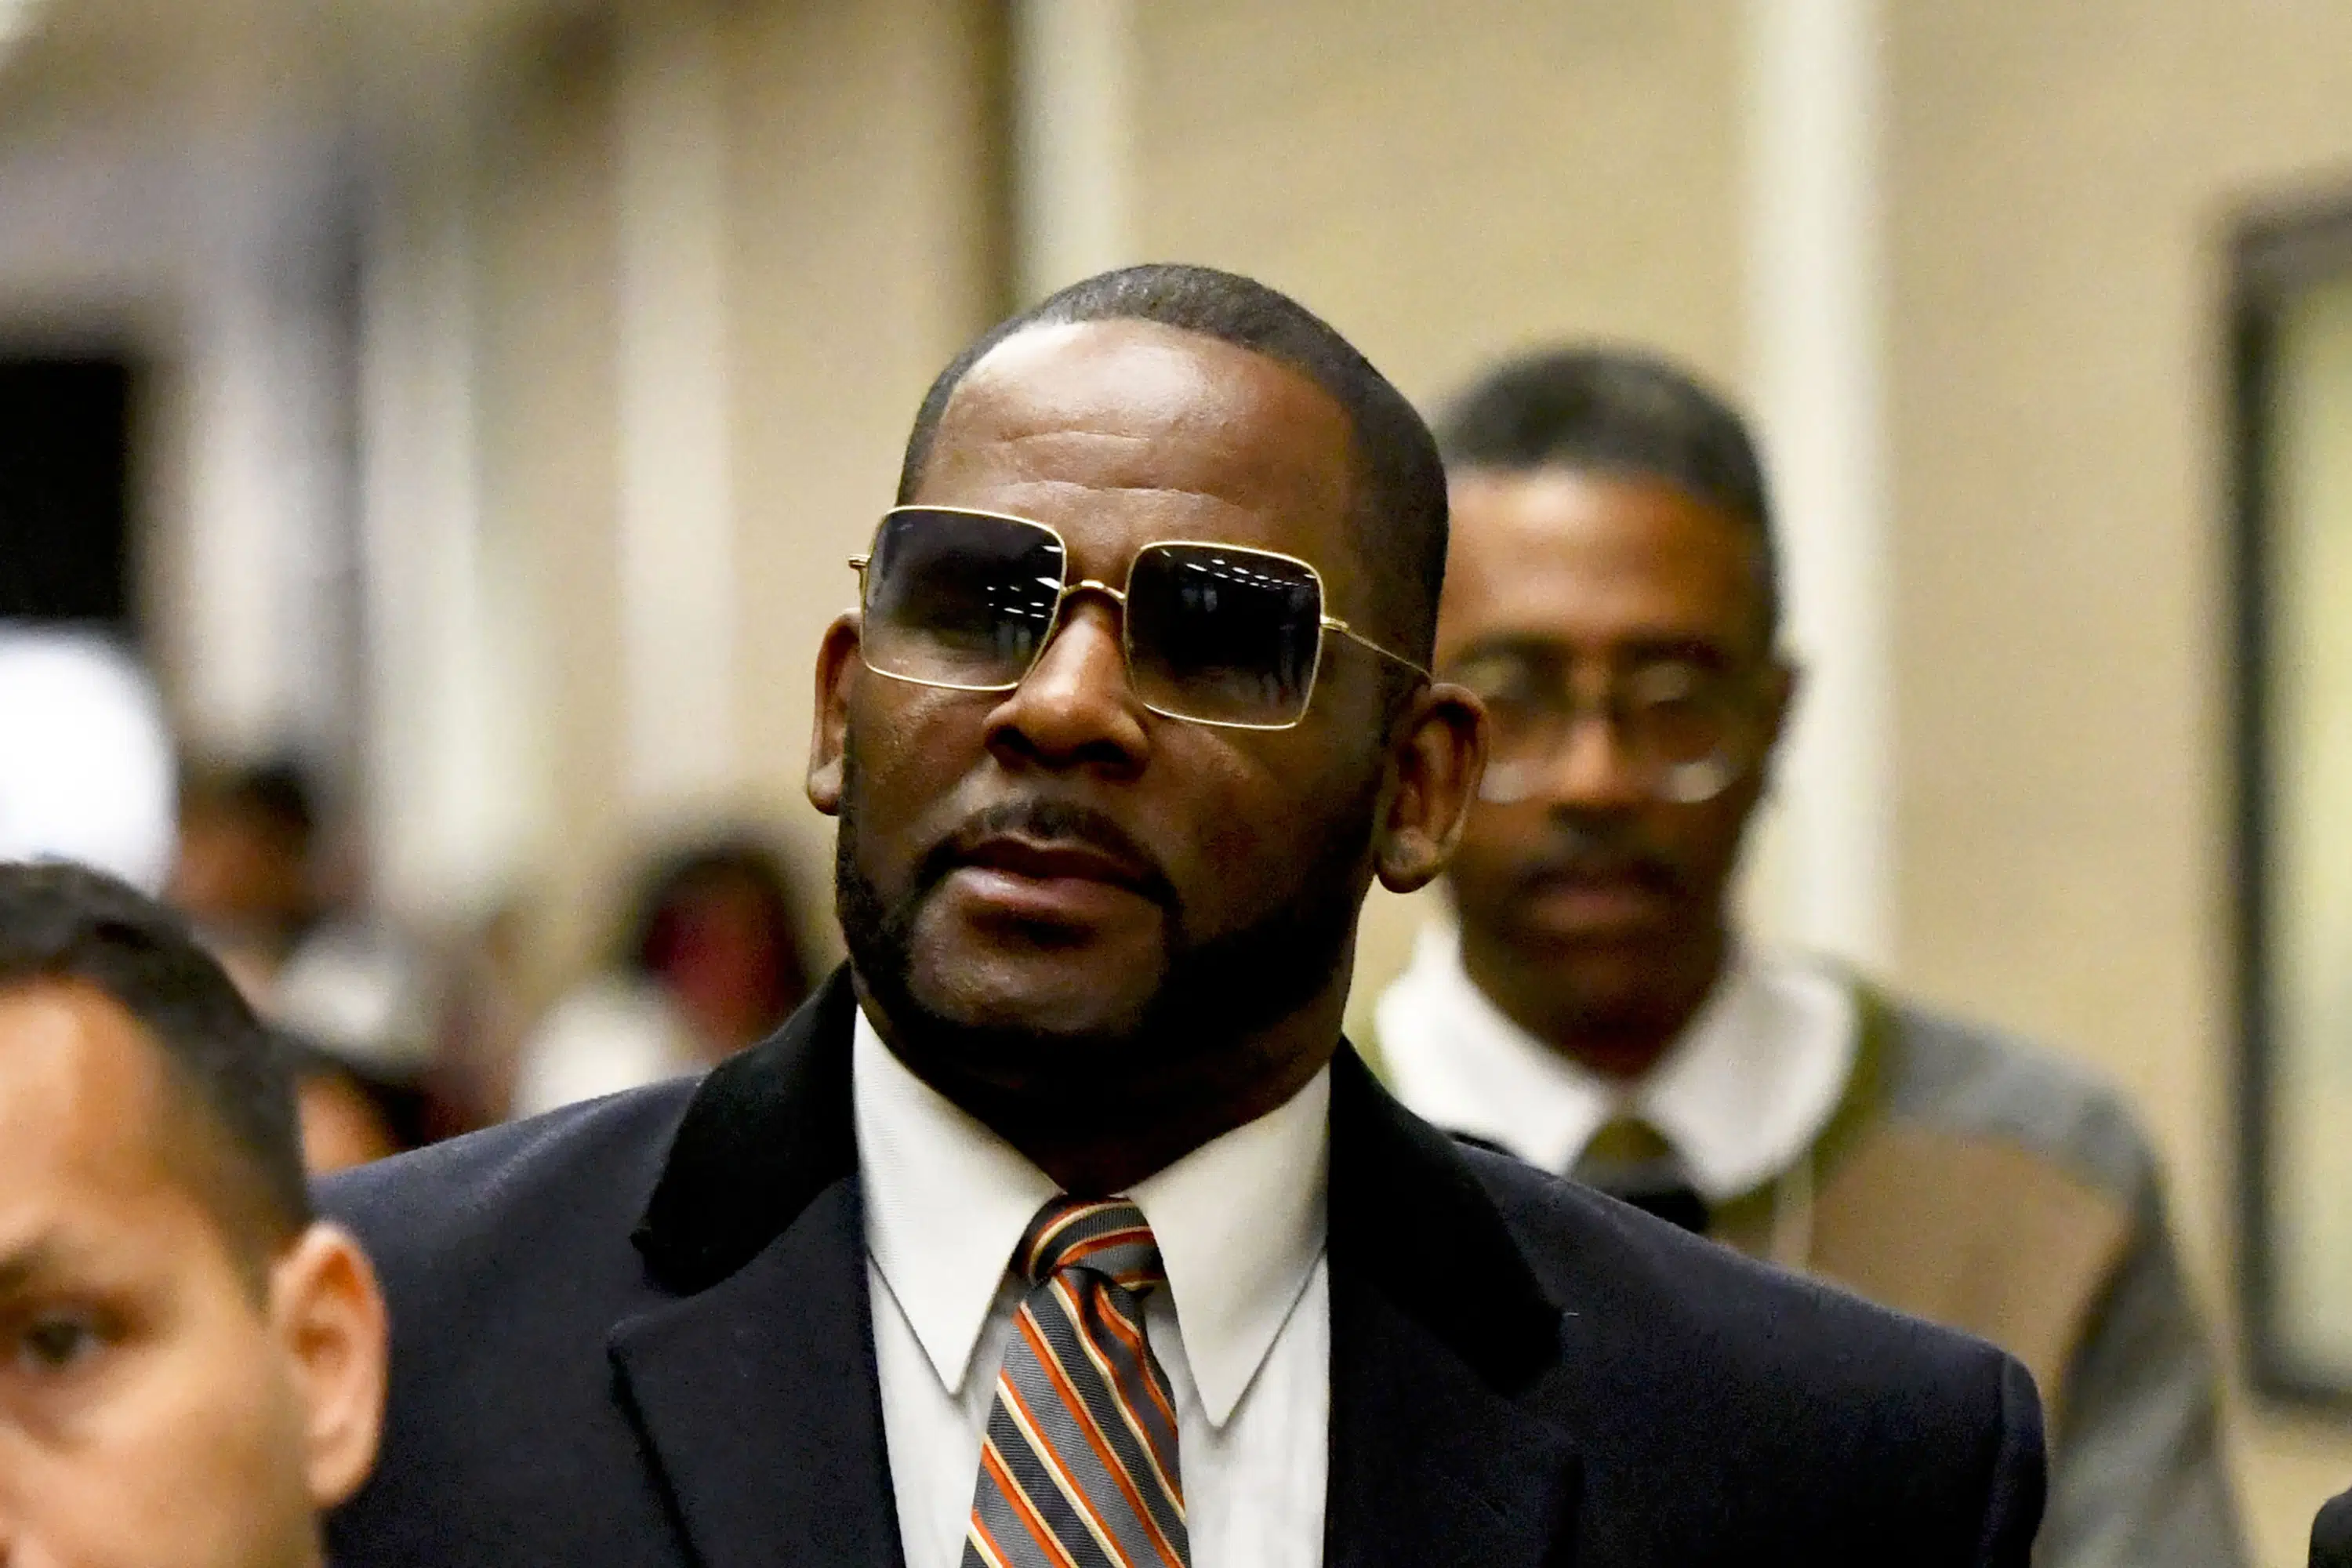 Chicago prosecutor dropping R. Kelly sex-abuse charges - The Associated Press